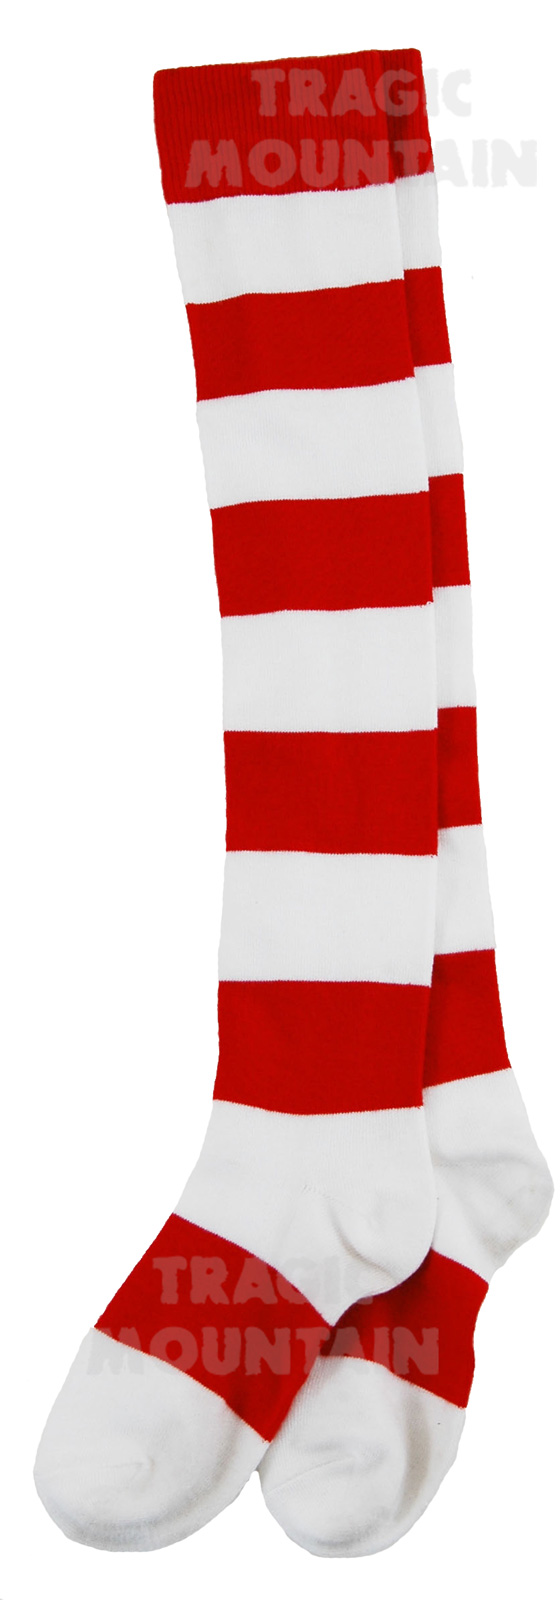 Waldo Wenda Elf Christmas Adult Red and White Striped Thick Knee Socks New